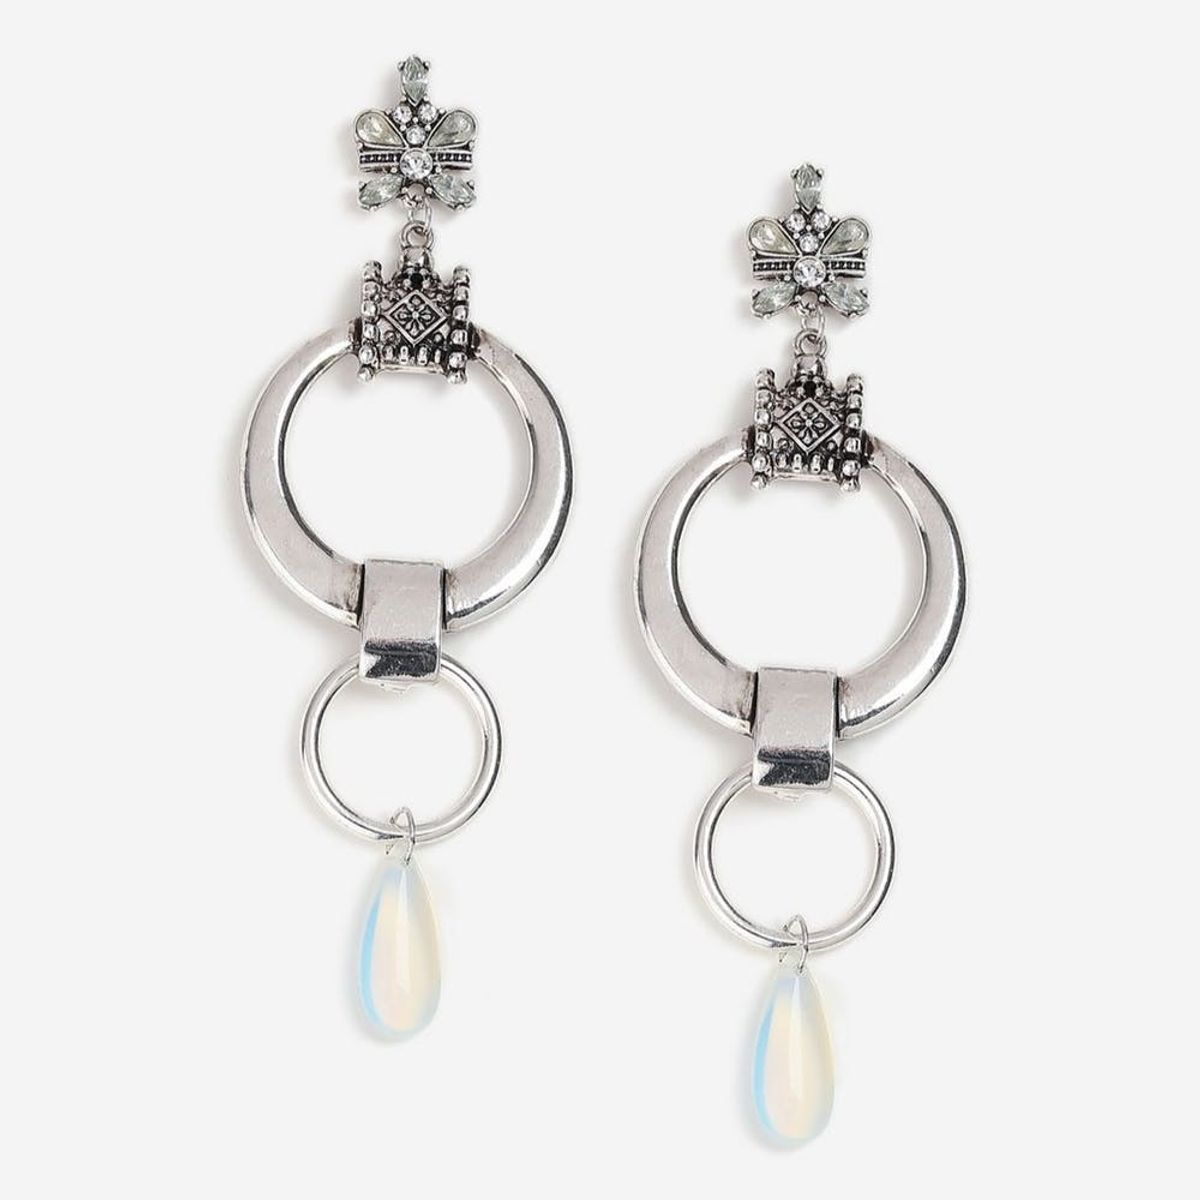 8 Long Earrings That Are Perfect for Spring Wedding Guests